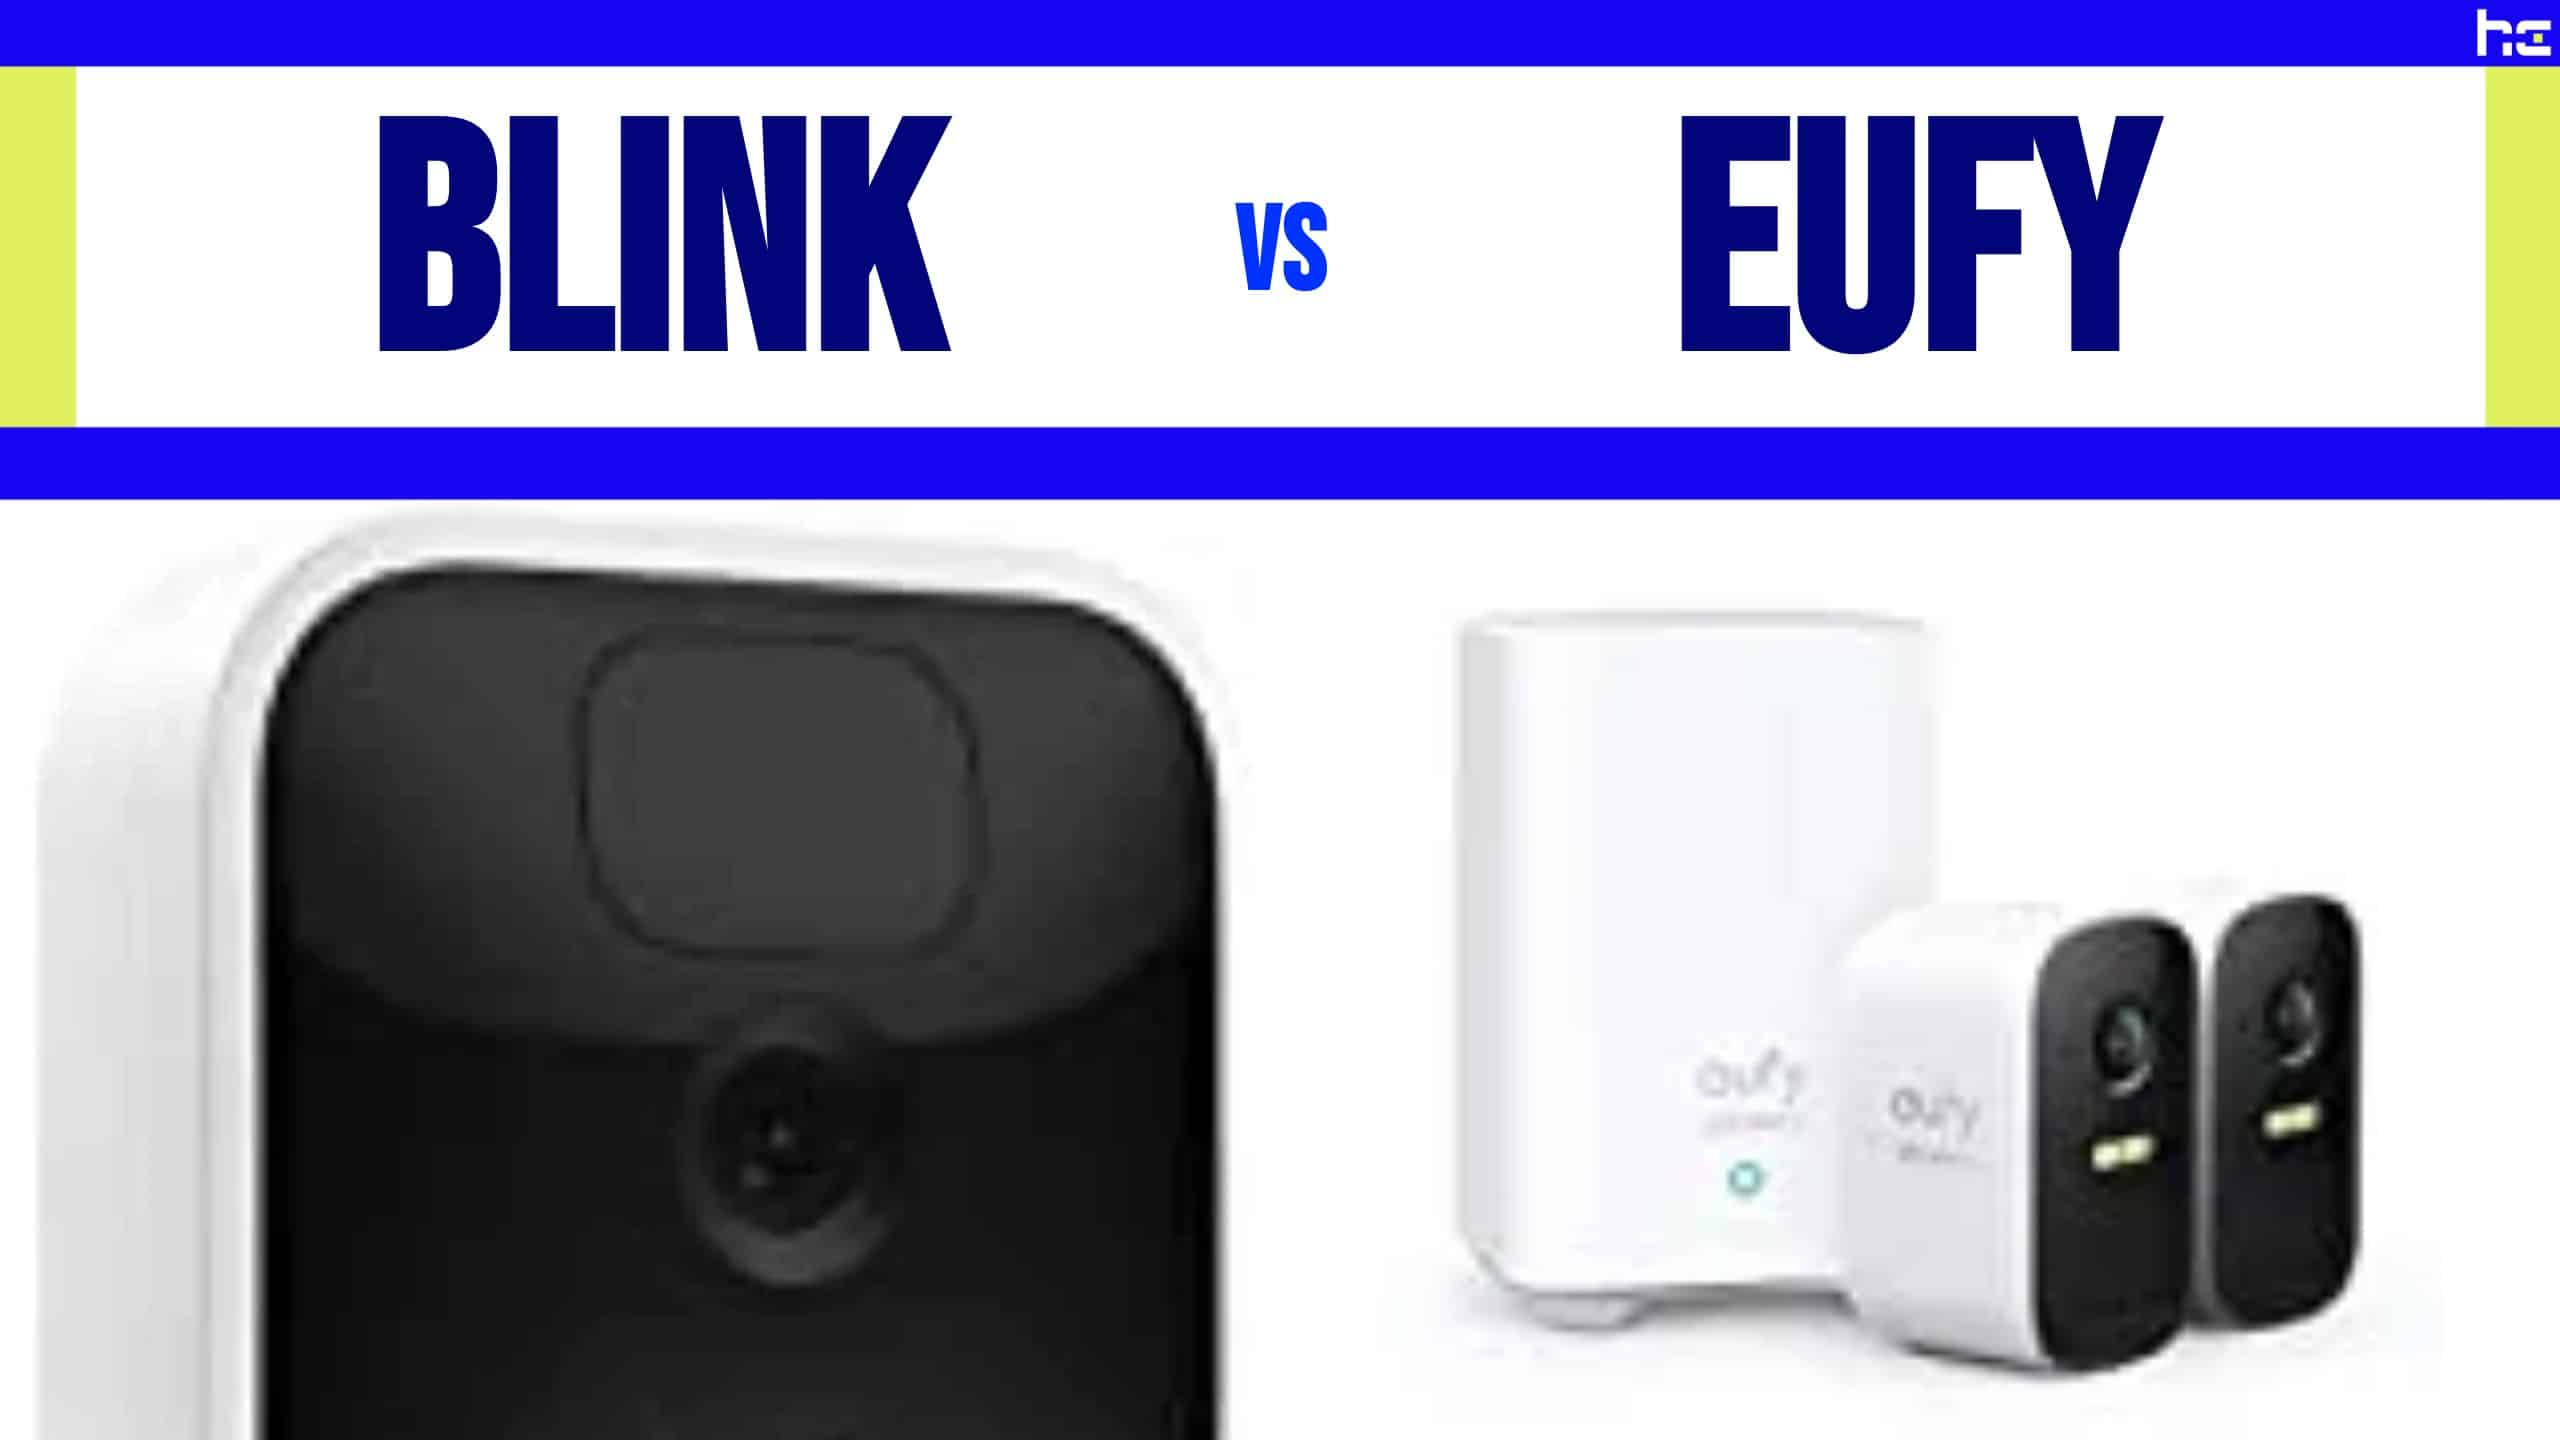 Blink vs Eufy featured image